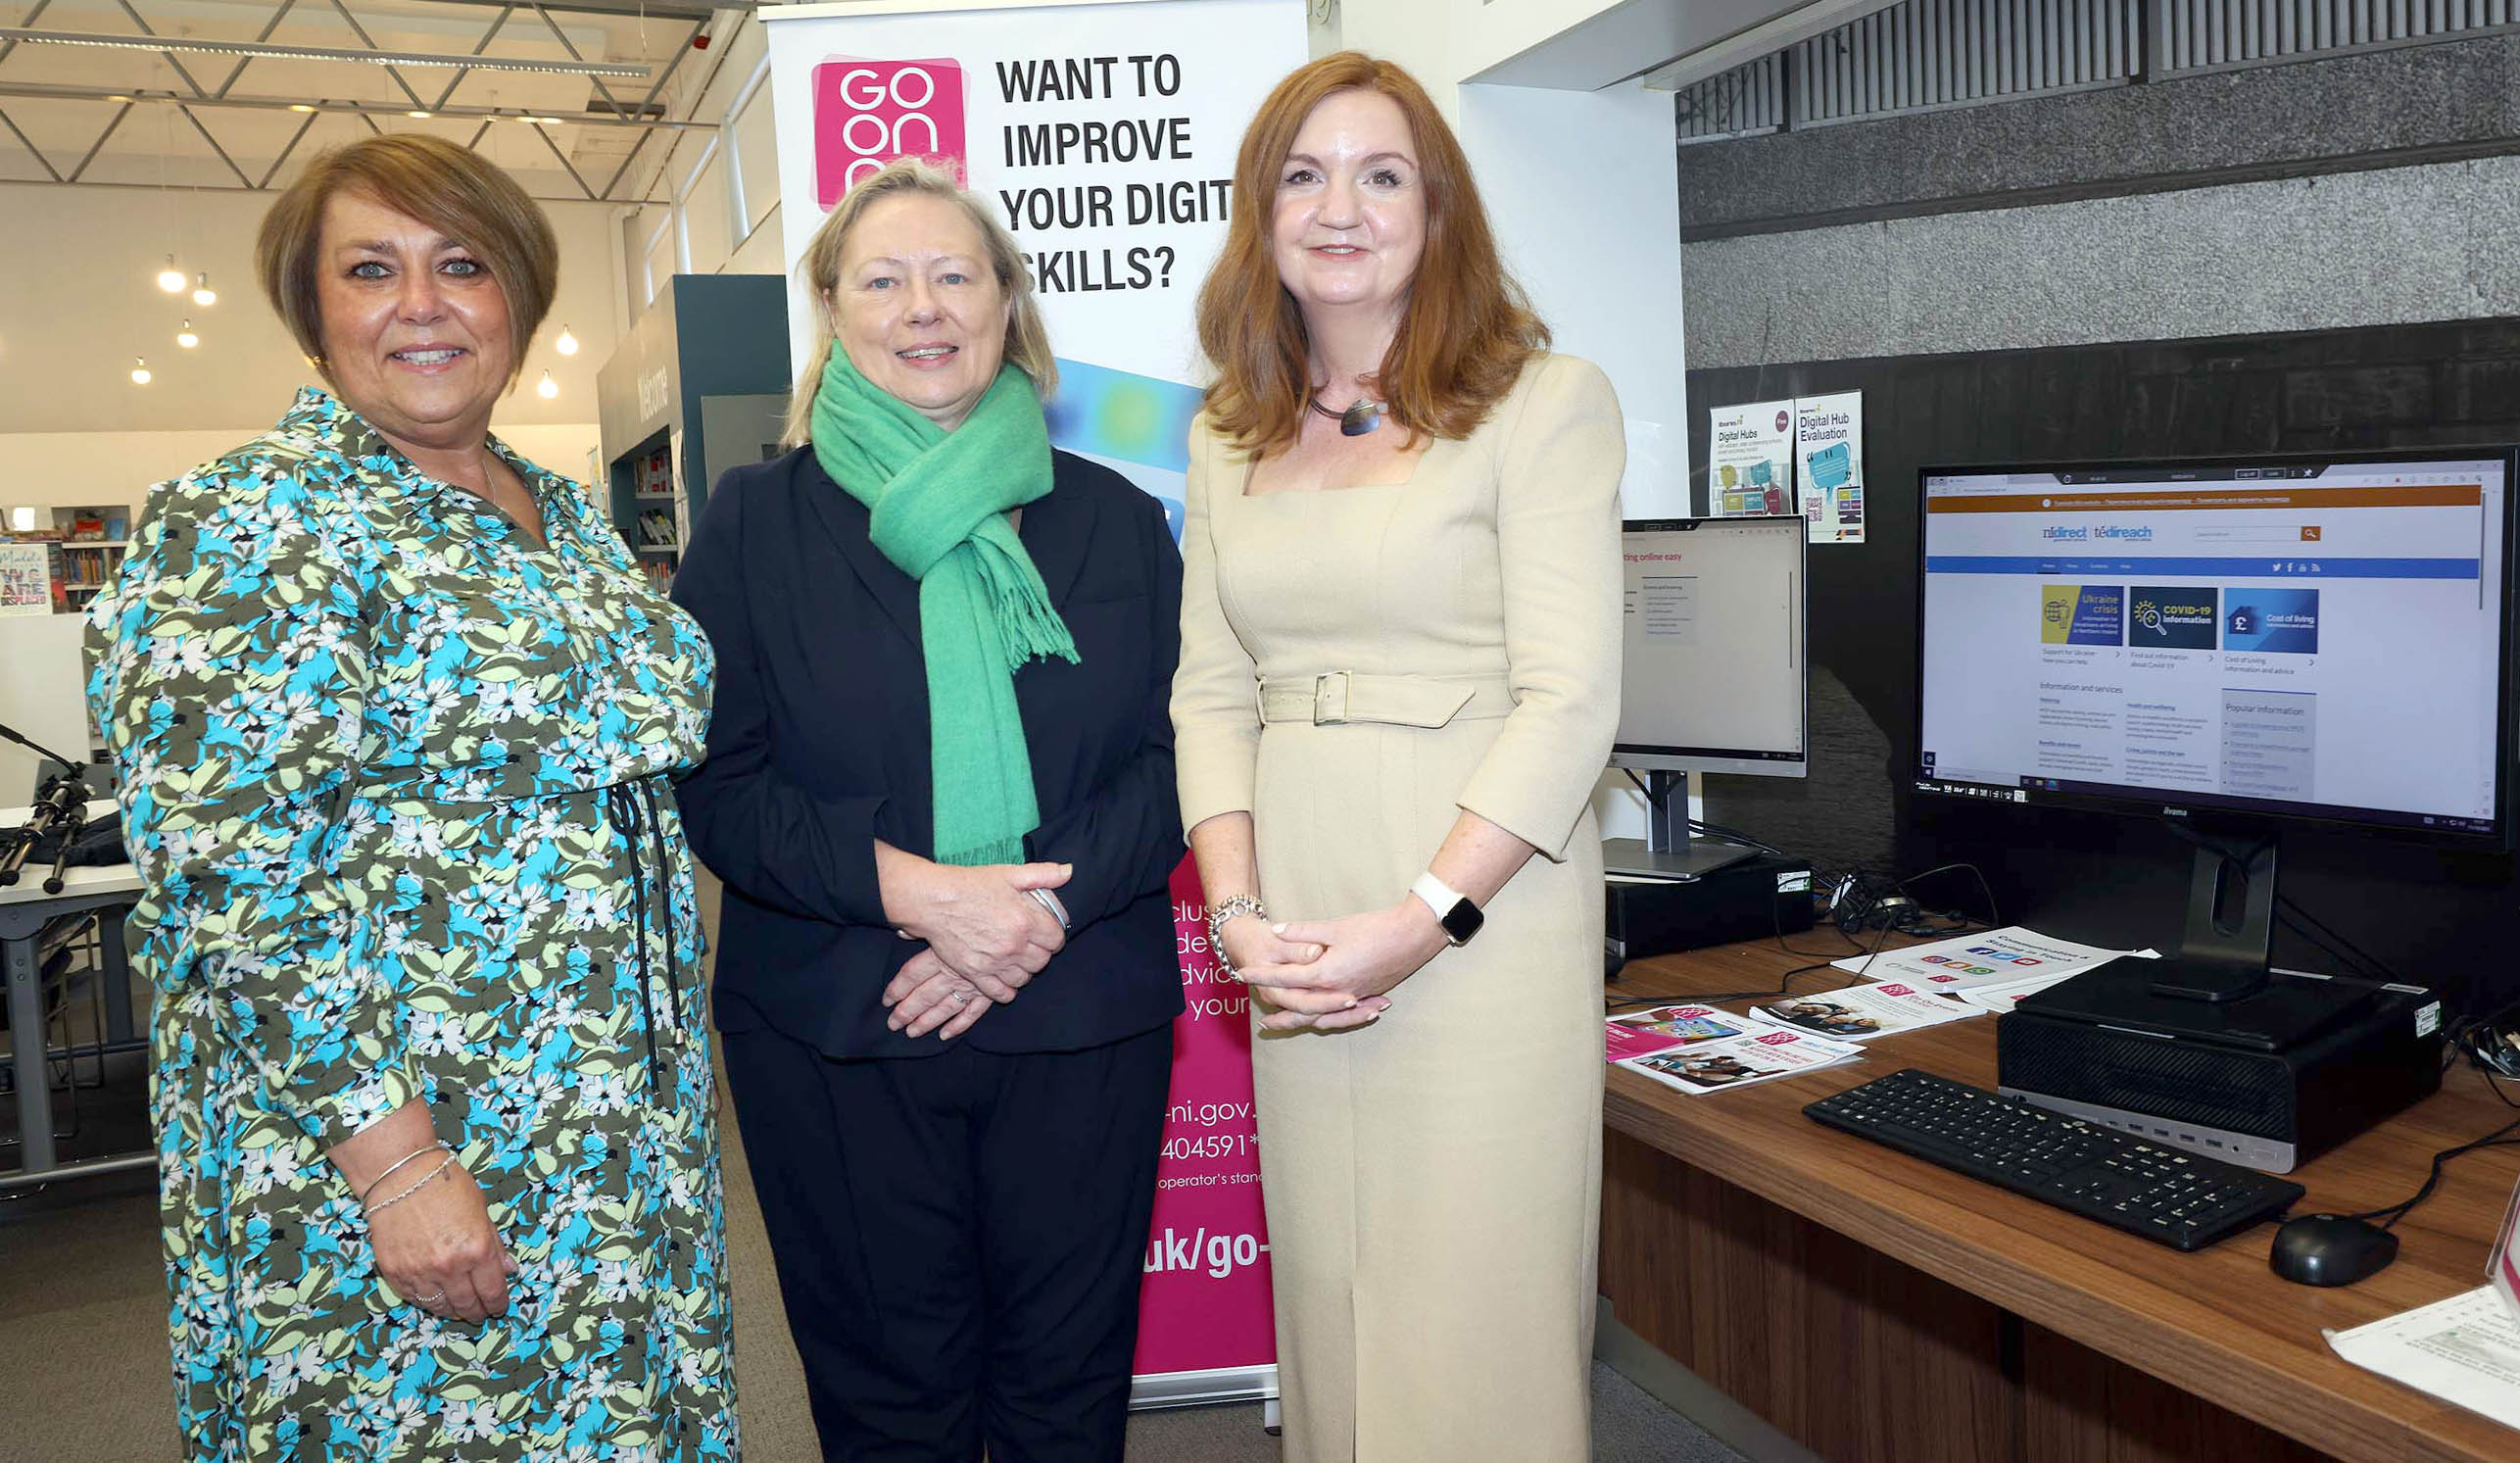 Kim Aiken (Deputy Head of Services, Libraries NI), Adrienne Adair (Director of Library Services, Libraries NI) and Head of the Civil Service Jayne Brady